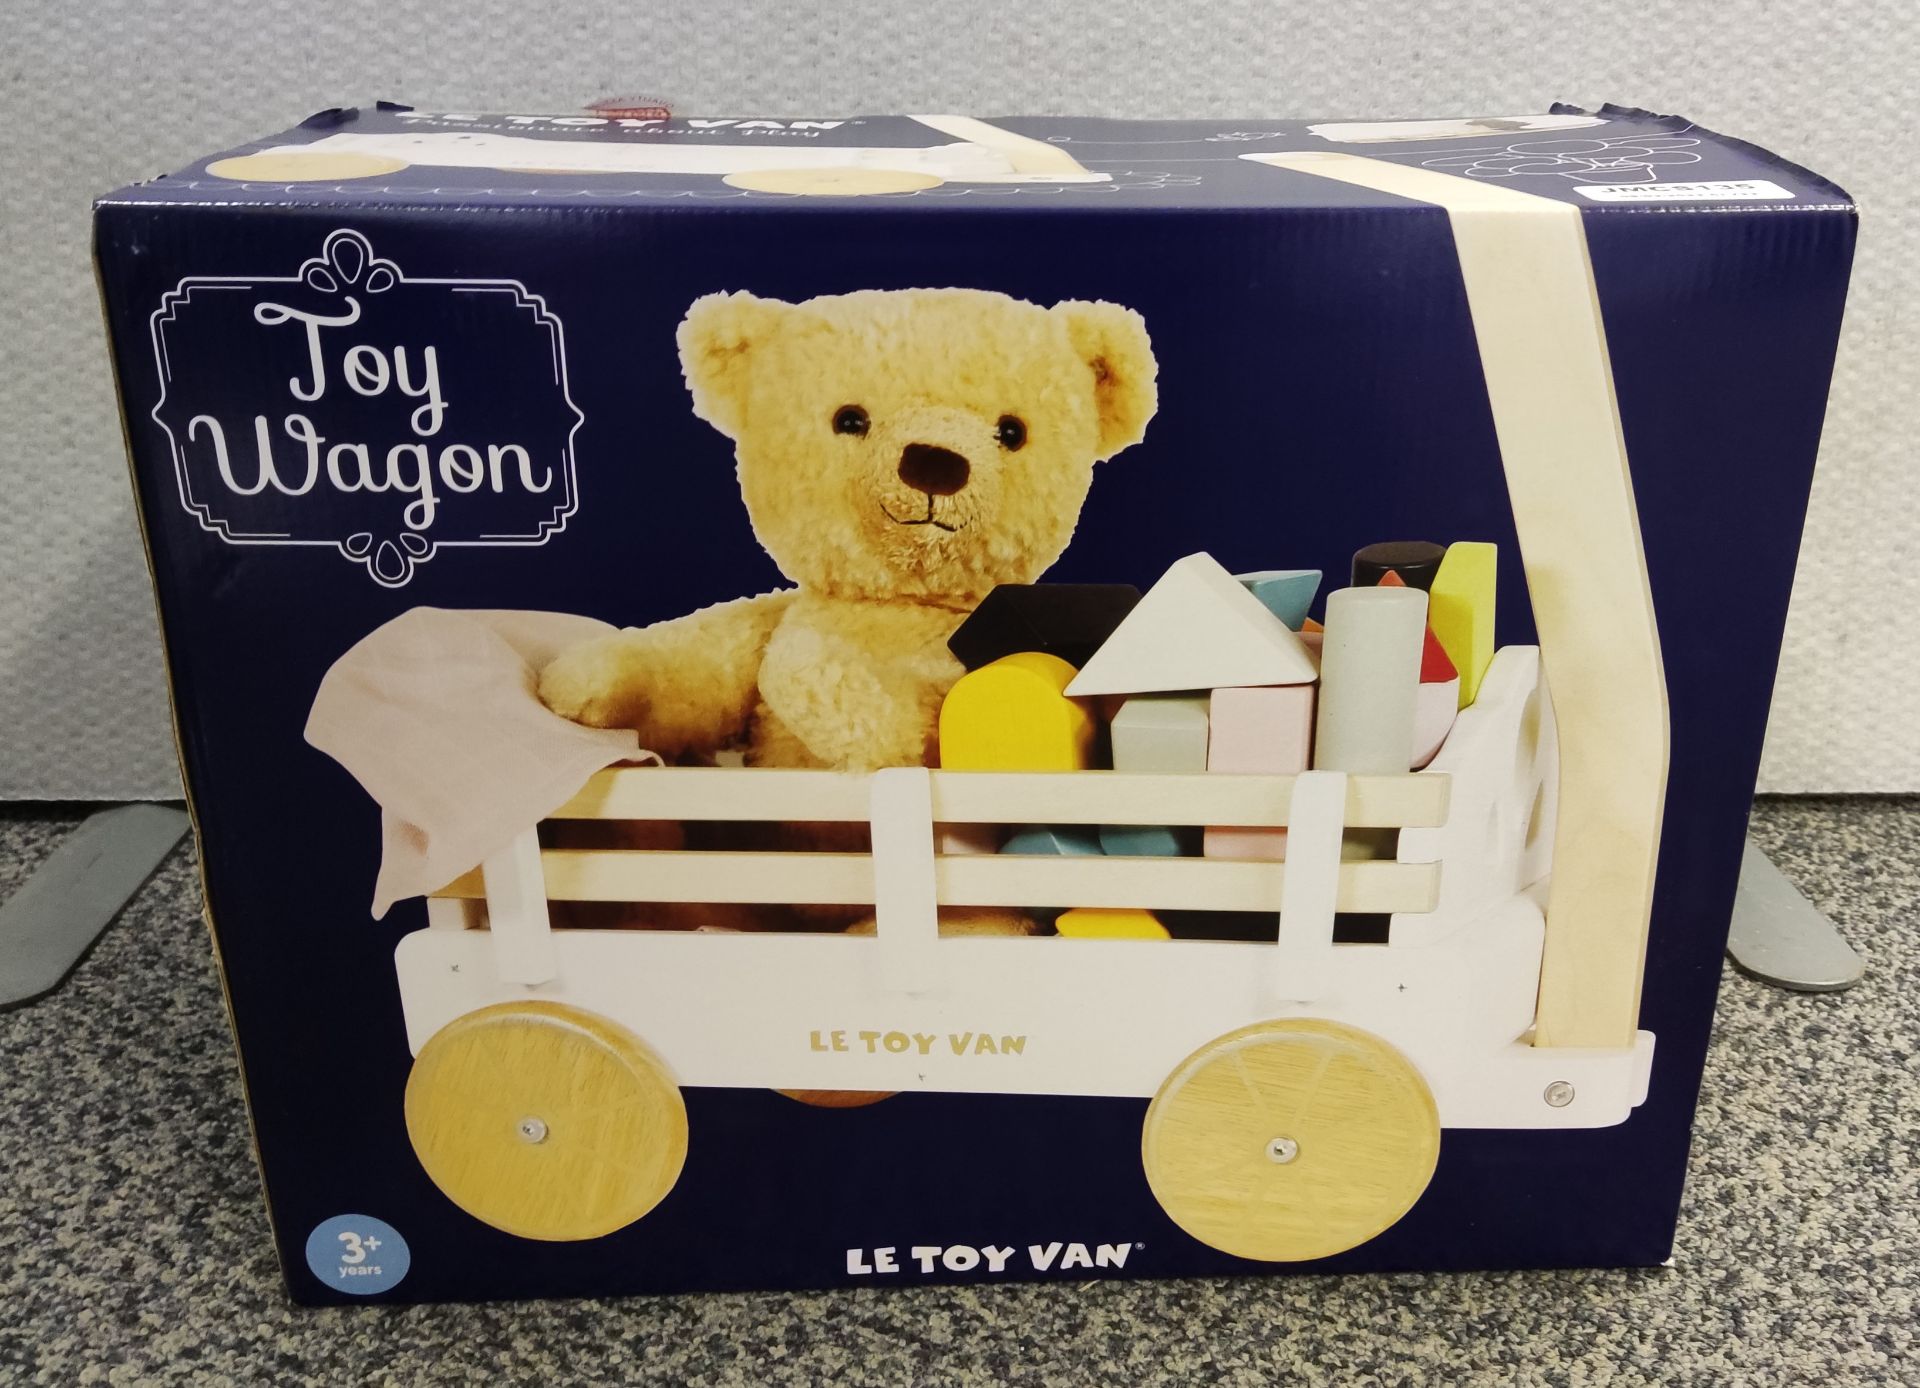 1 x Le Toy Van Pull Along Wooden Toy Wagon - New/Boxed - Image 3 of 5